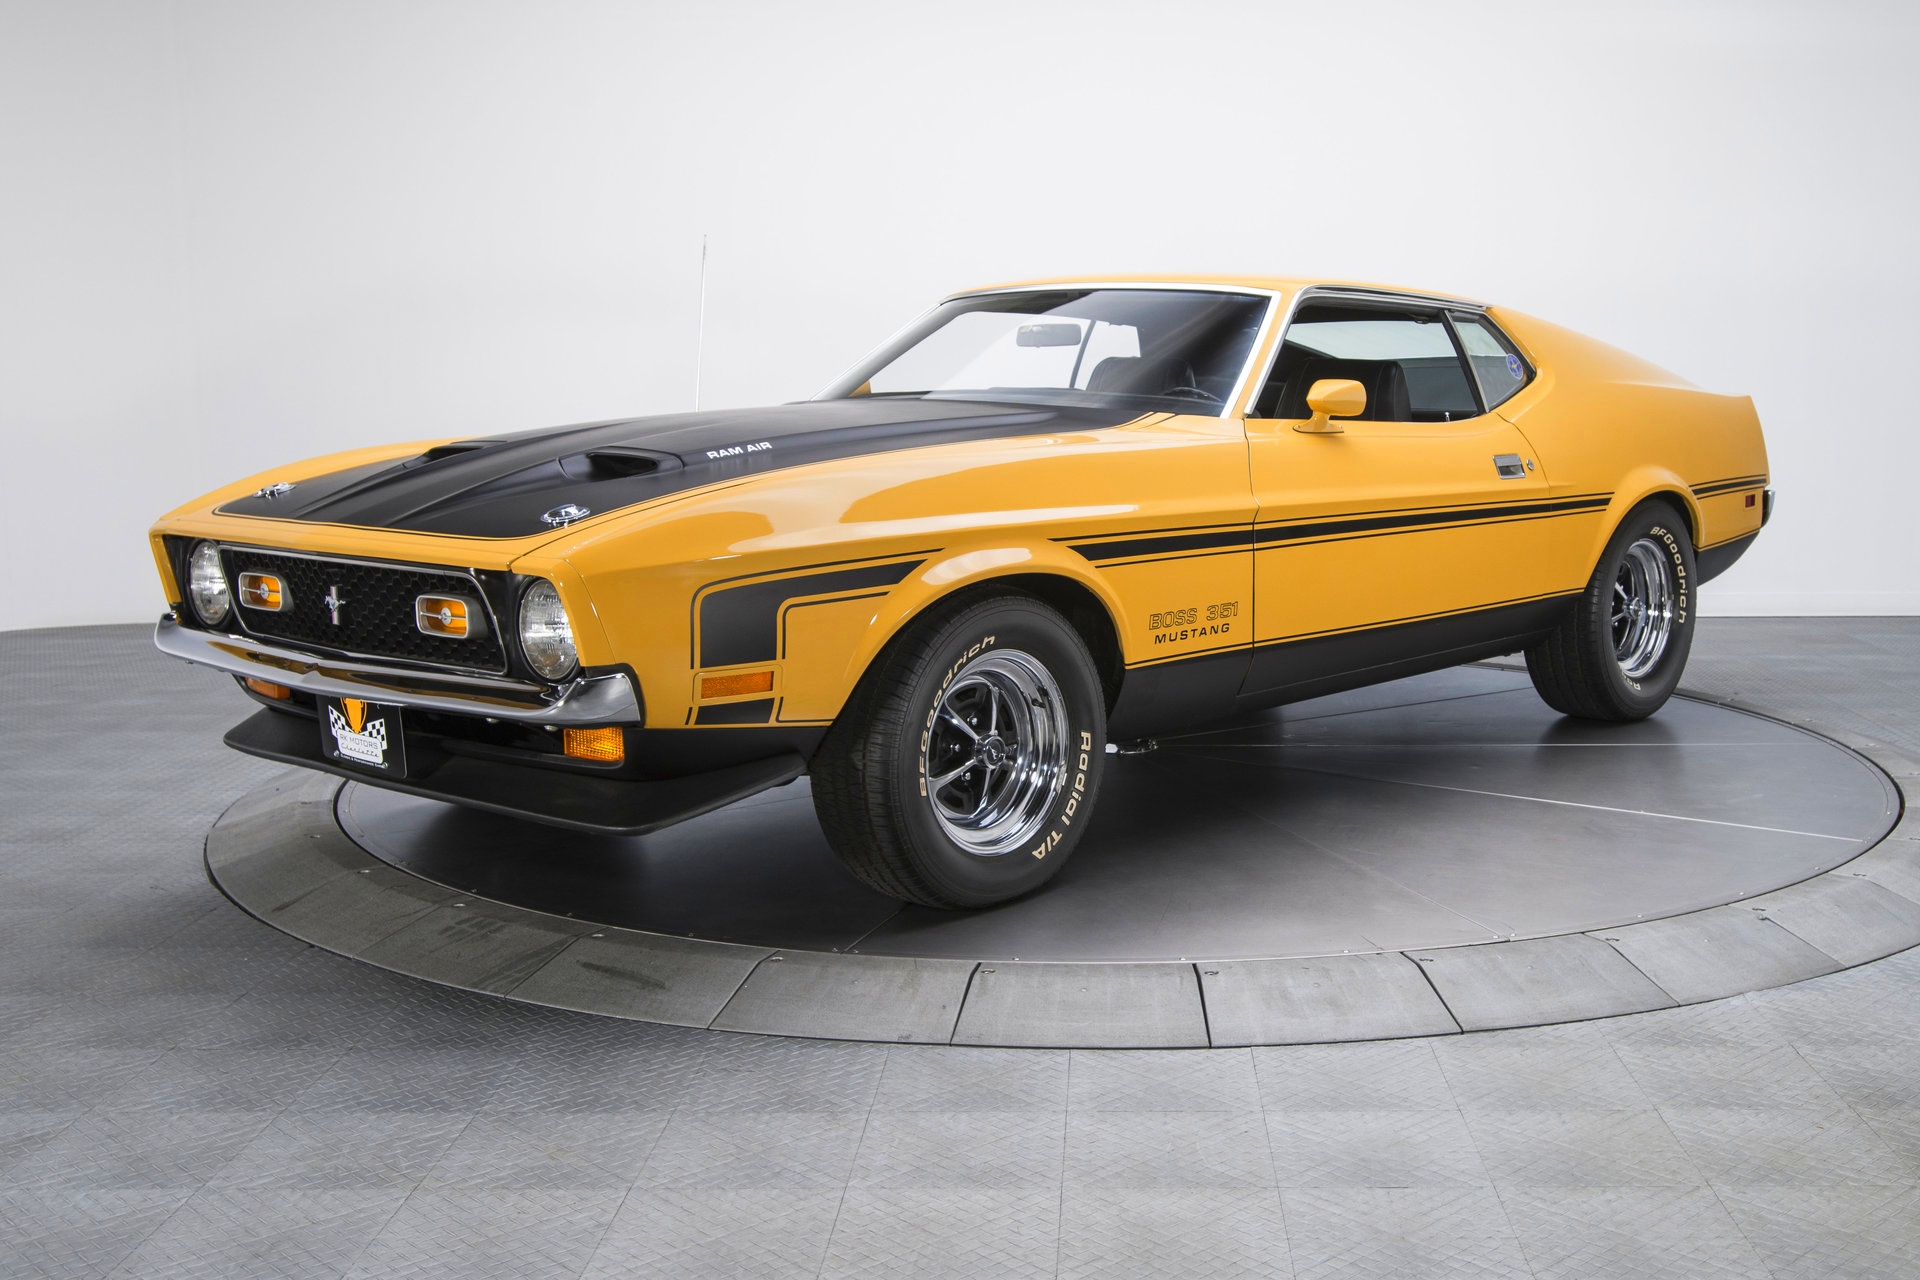 ford mustang boss, vehicles, ford mustang boss 351, car, ford, muscle car, yellow car